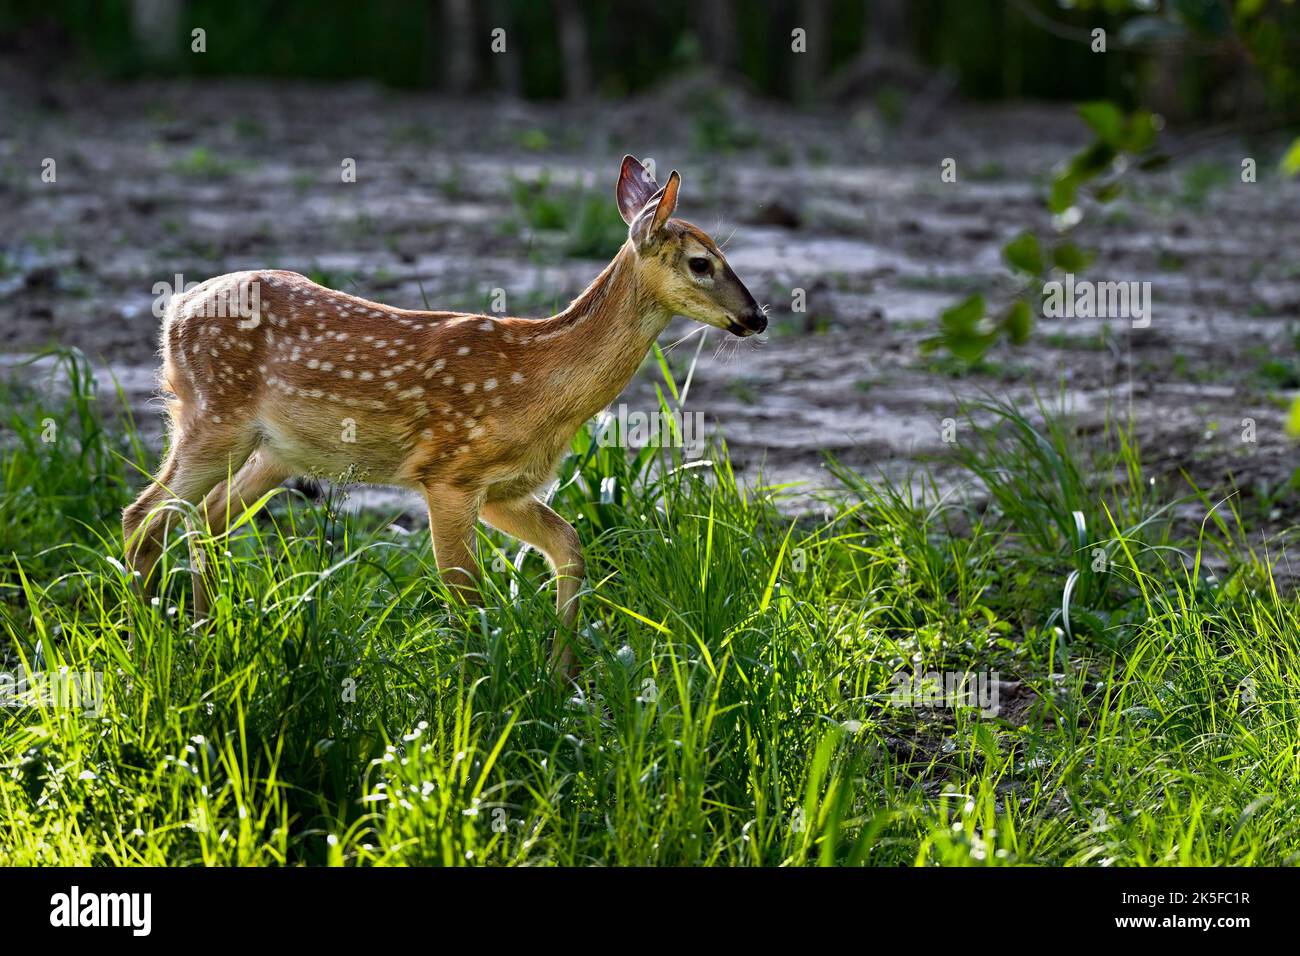 White-Tailed Deer Fawn nella foresta. Foto Stock